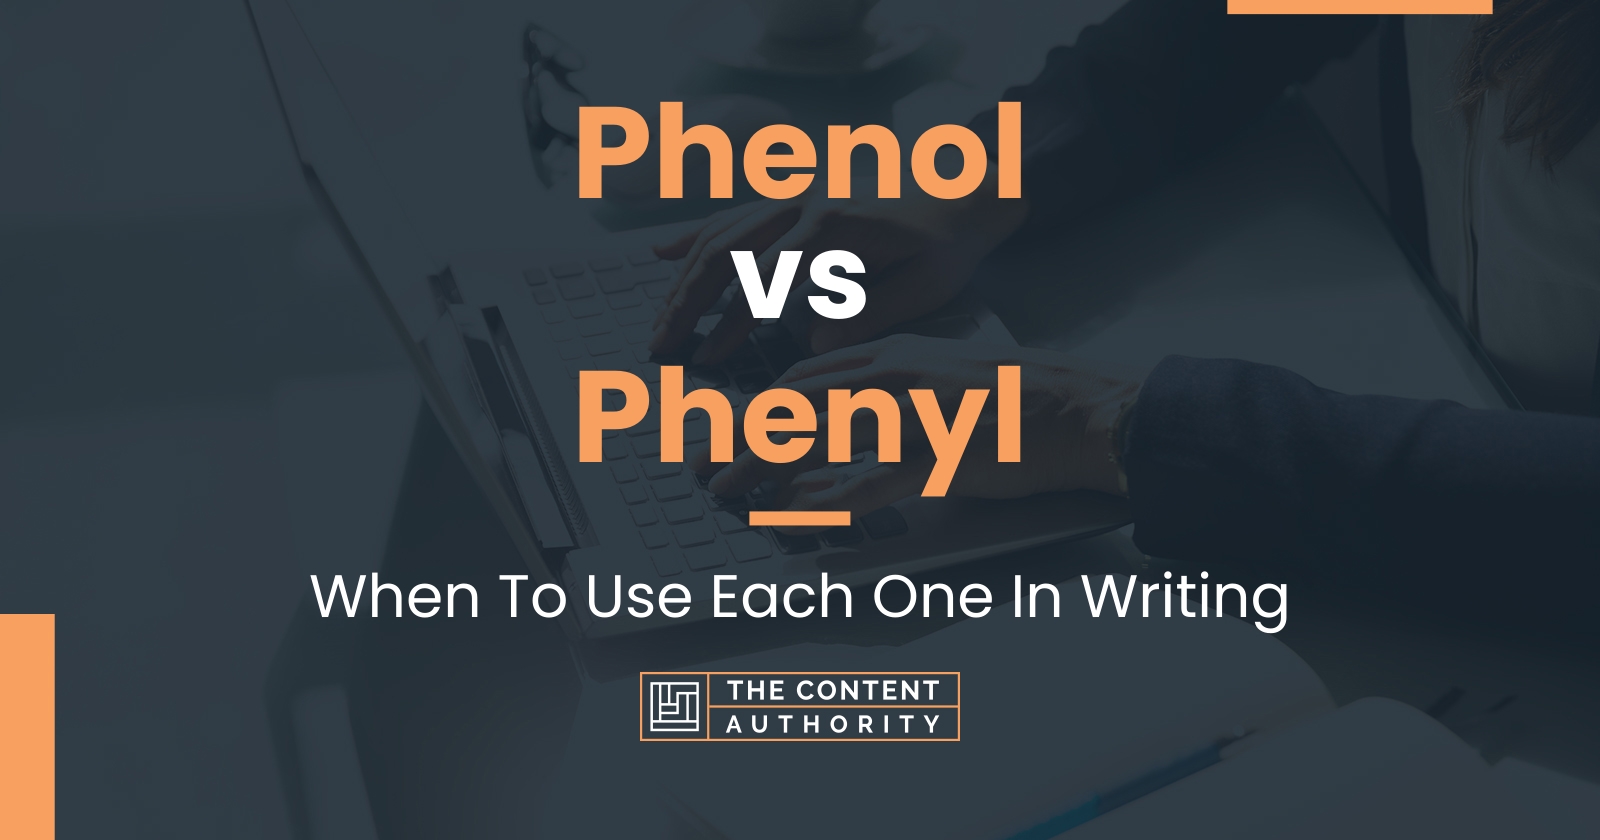 Phenol vs Phenyl: When To Use Each One In Writing